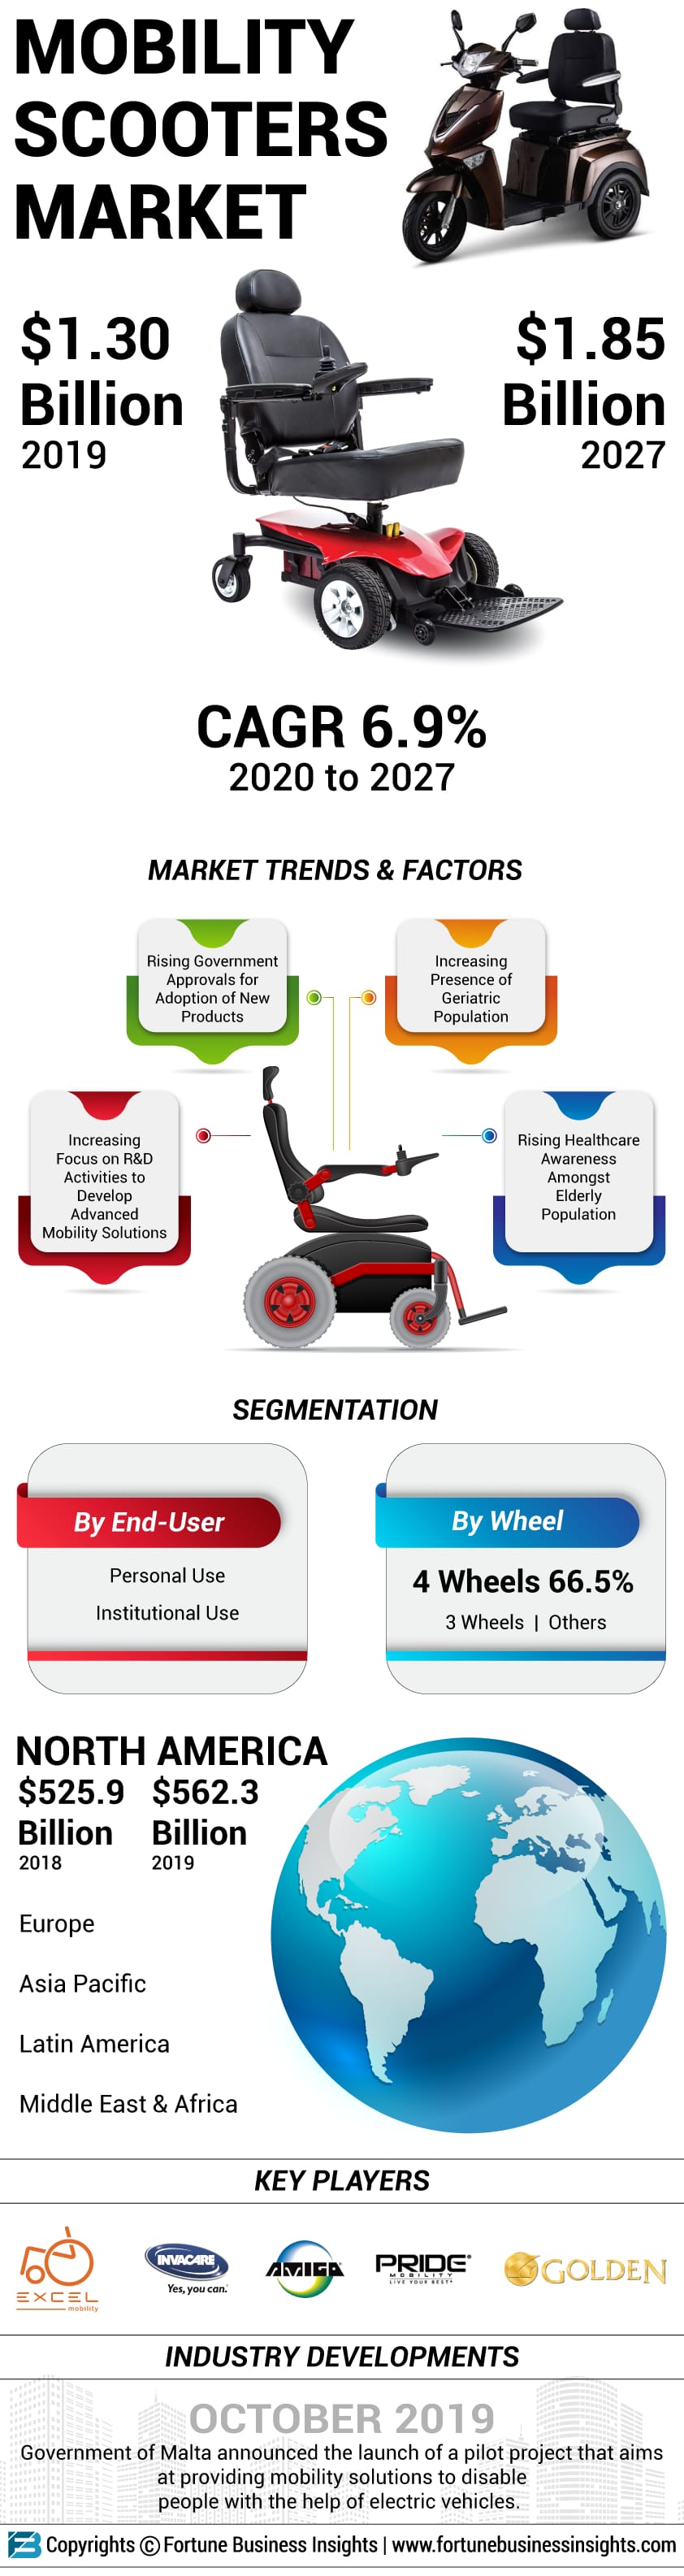 Mobility Scooter Market